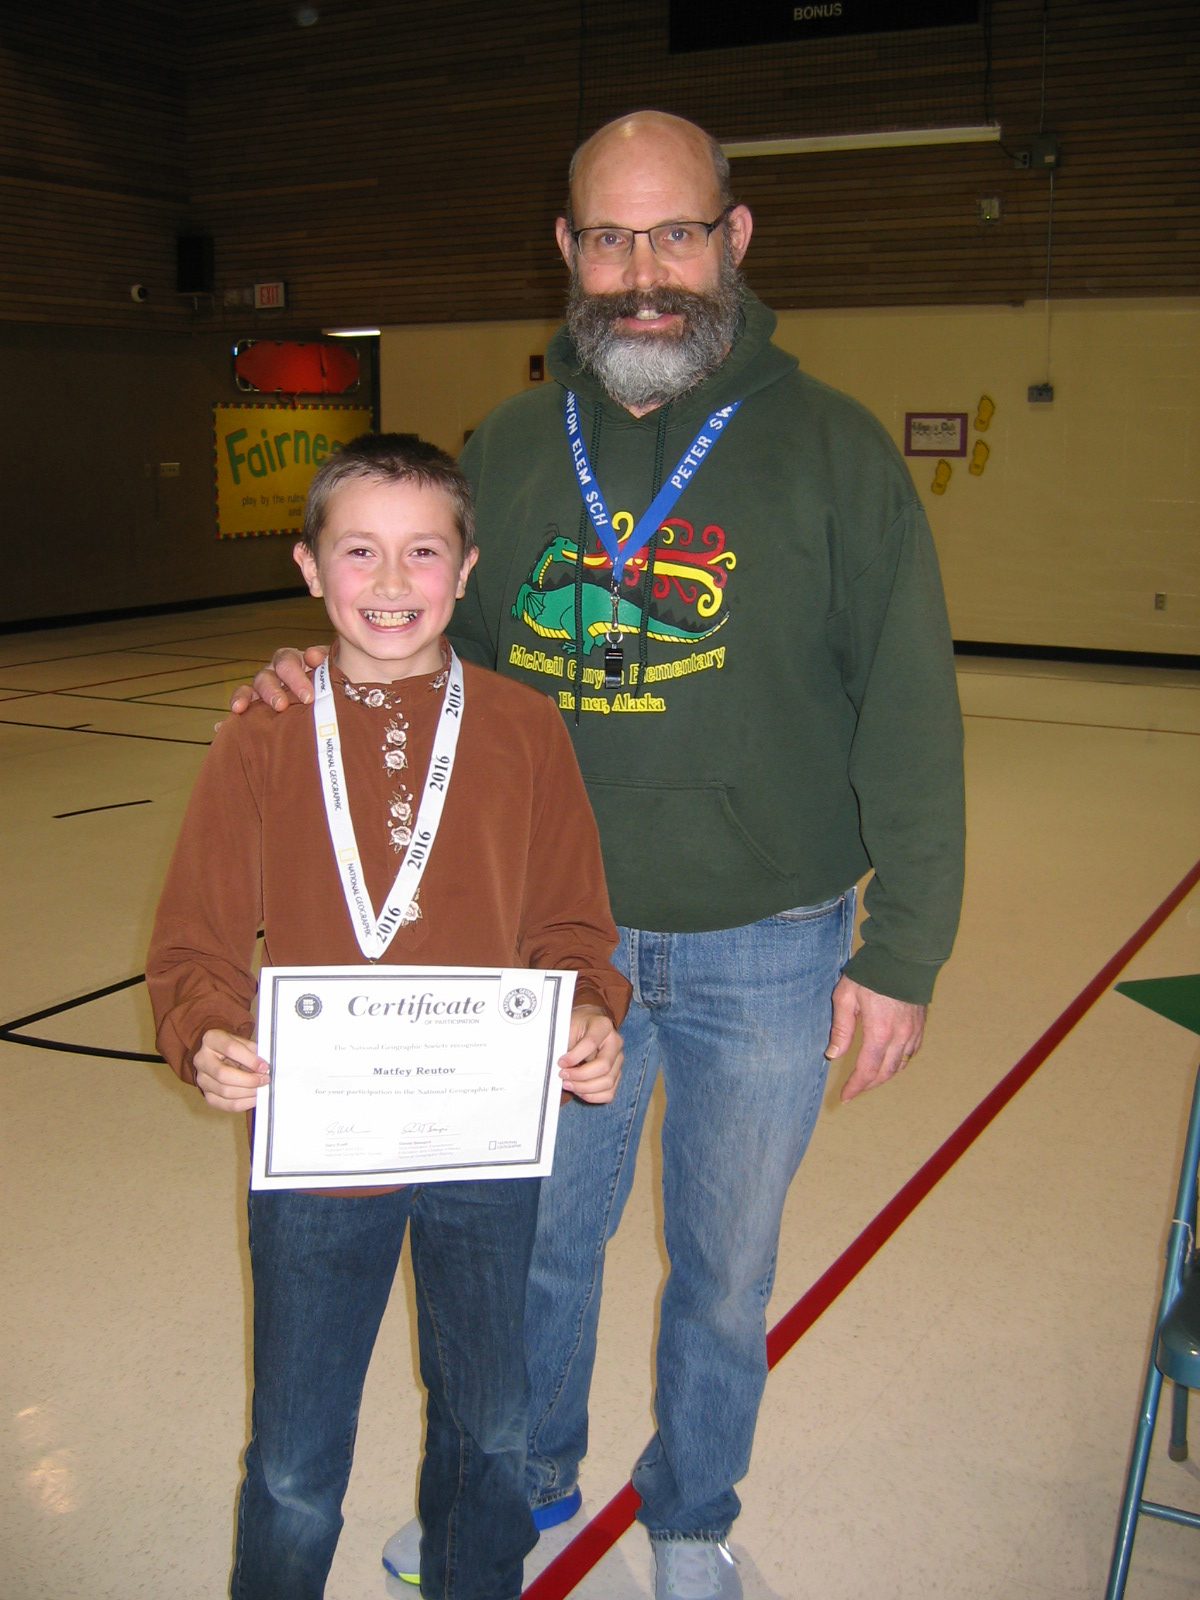 Matfey Reutov shows off his certificate after winning McNeil Canyon Elementary School’s geography bee. Principal Pete Swanson, right, is there to congratulate Matfey.-Photo provided